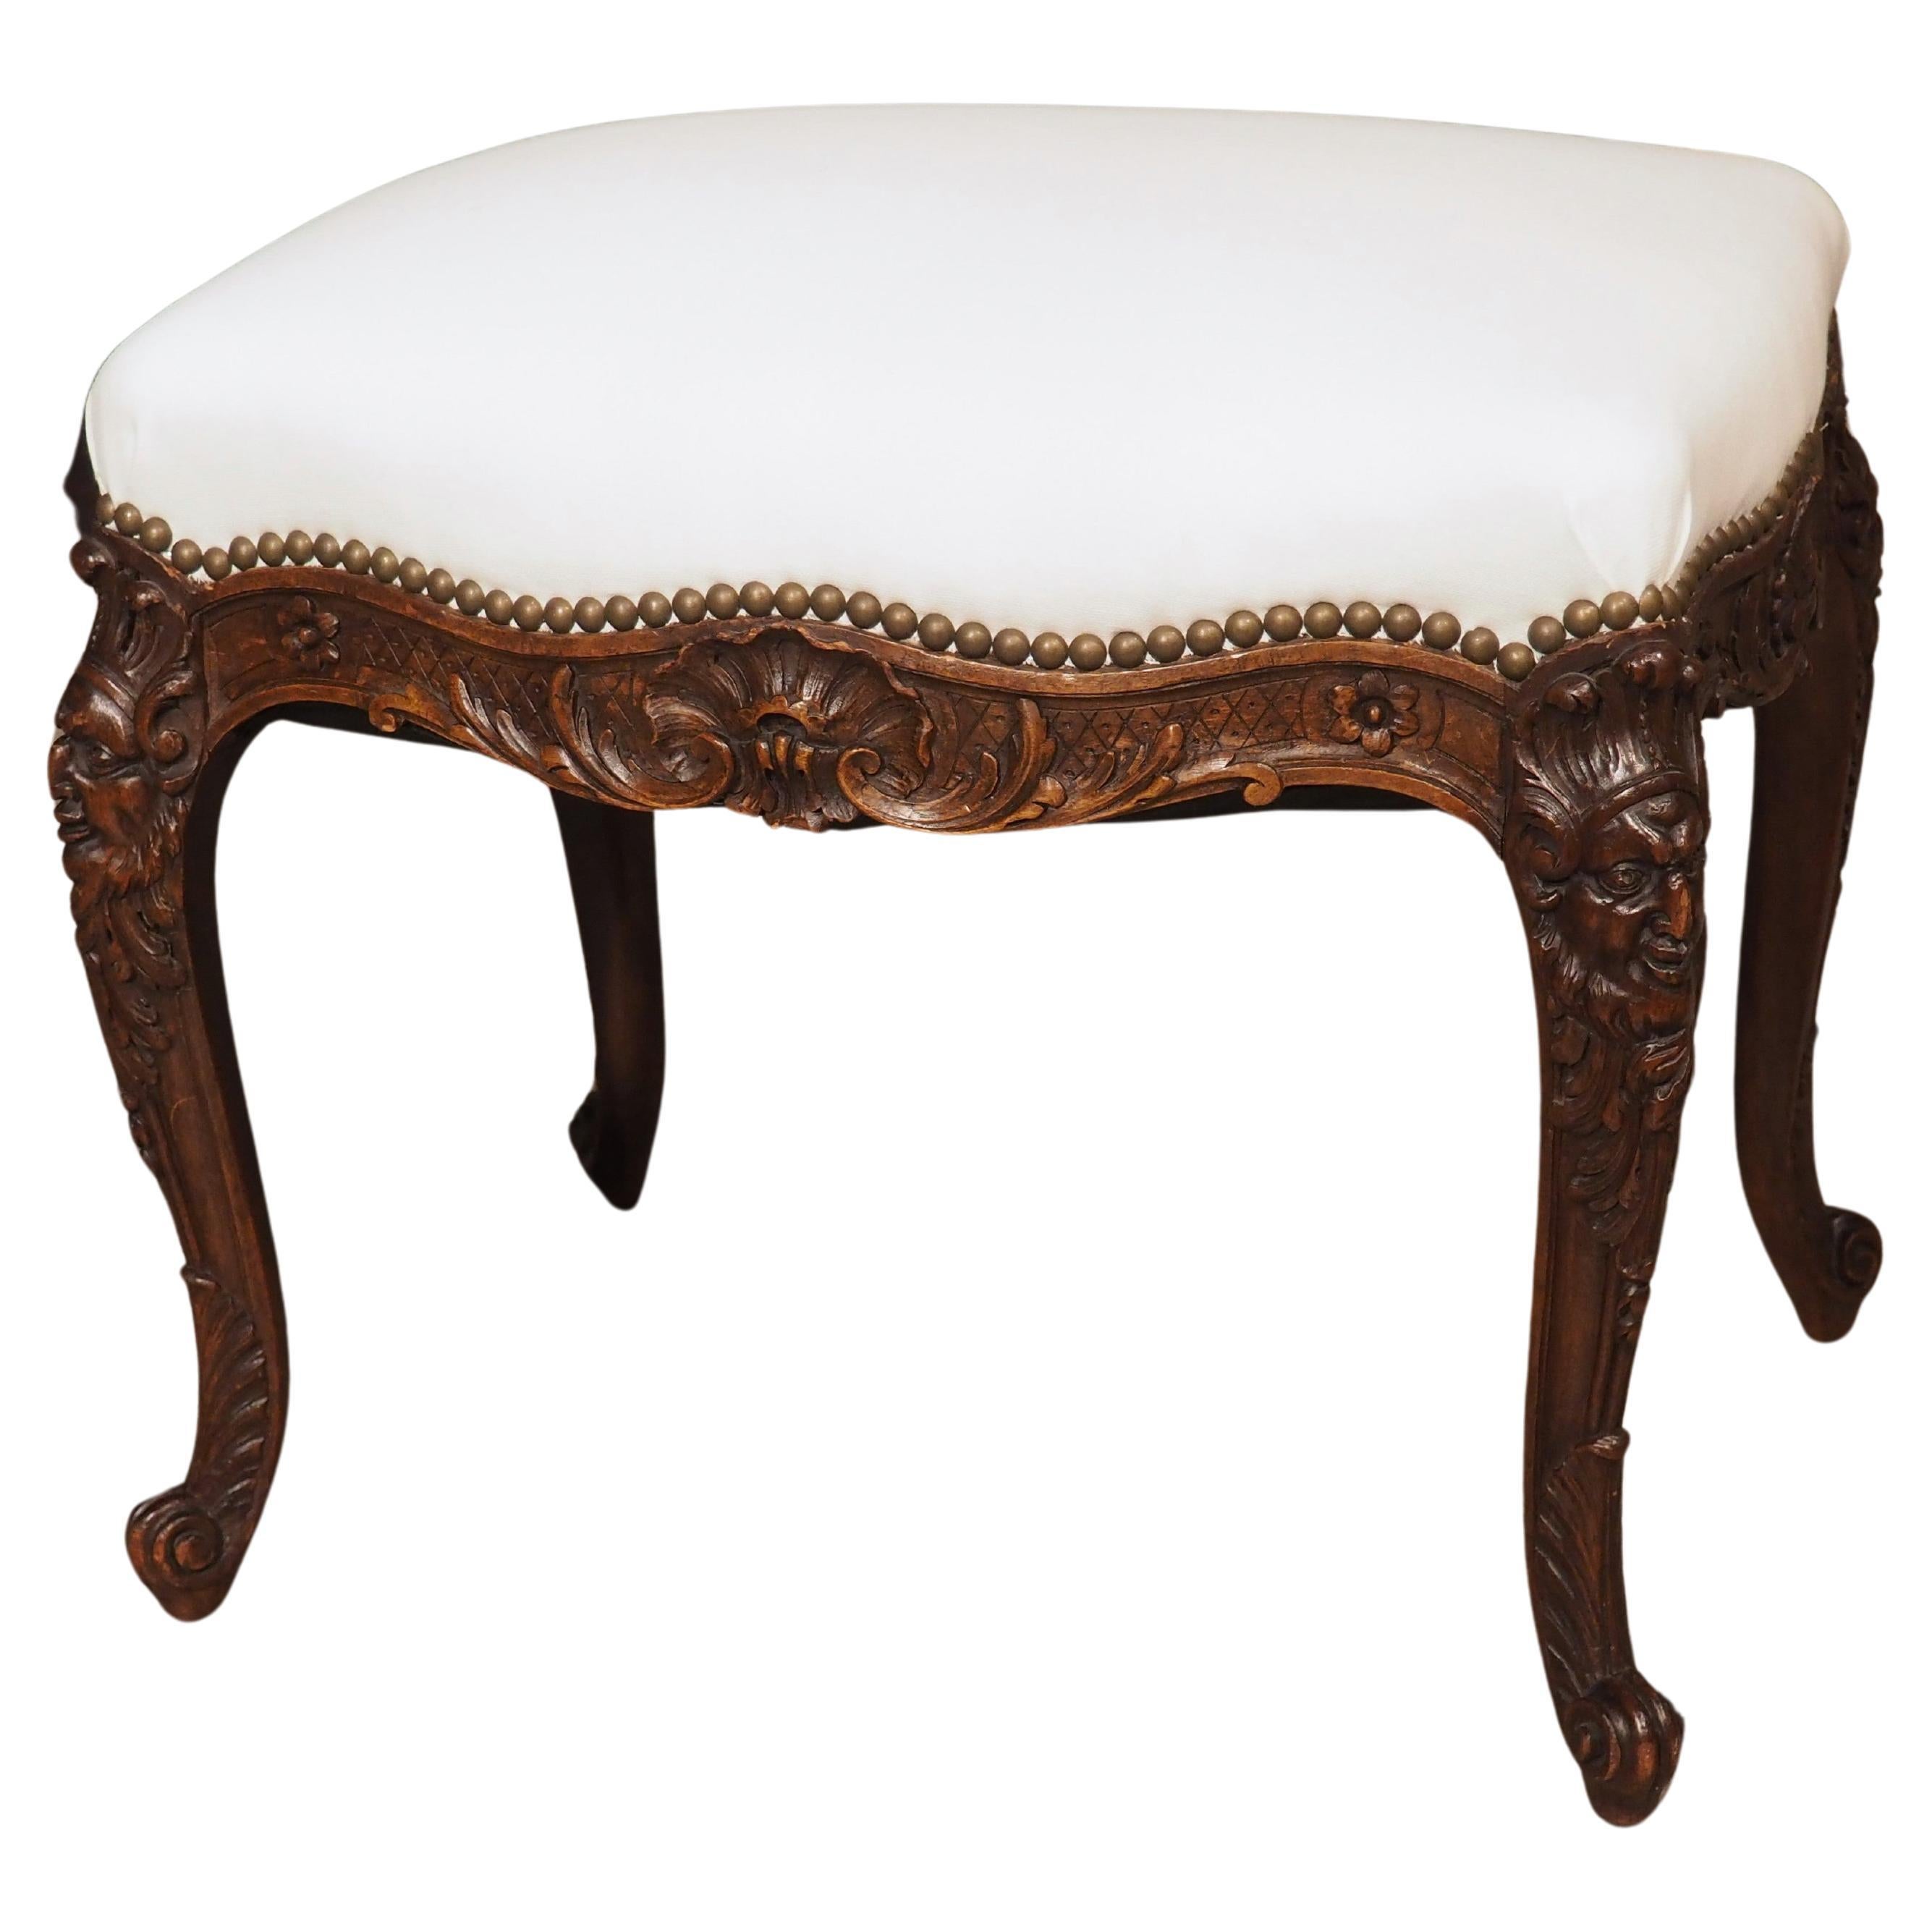 19th Century Carved Walnut Regence Style Tabouret from France For Sale